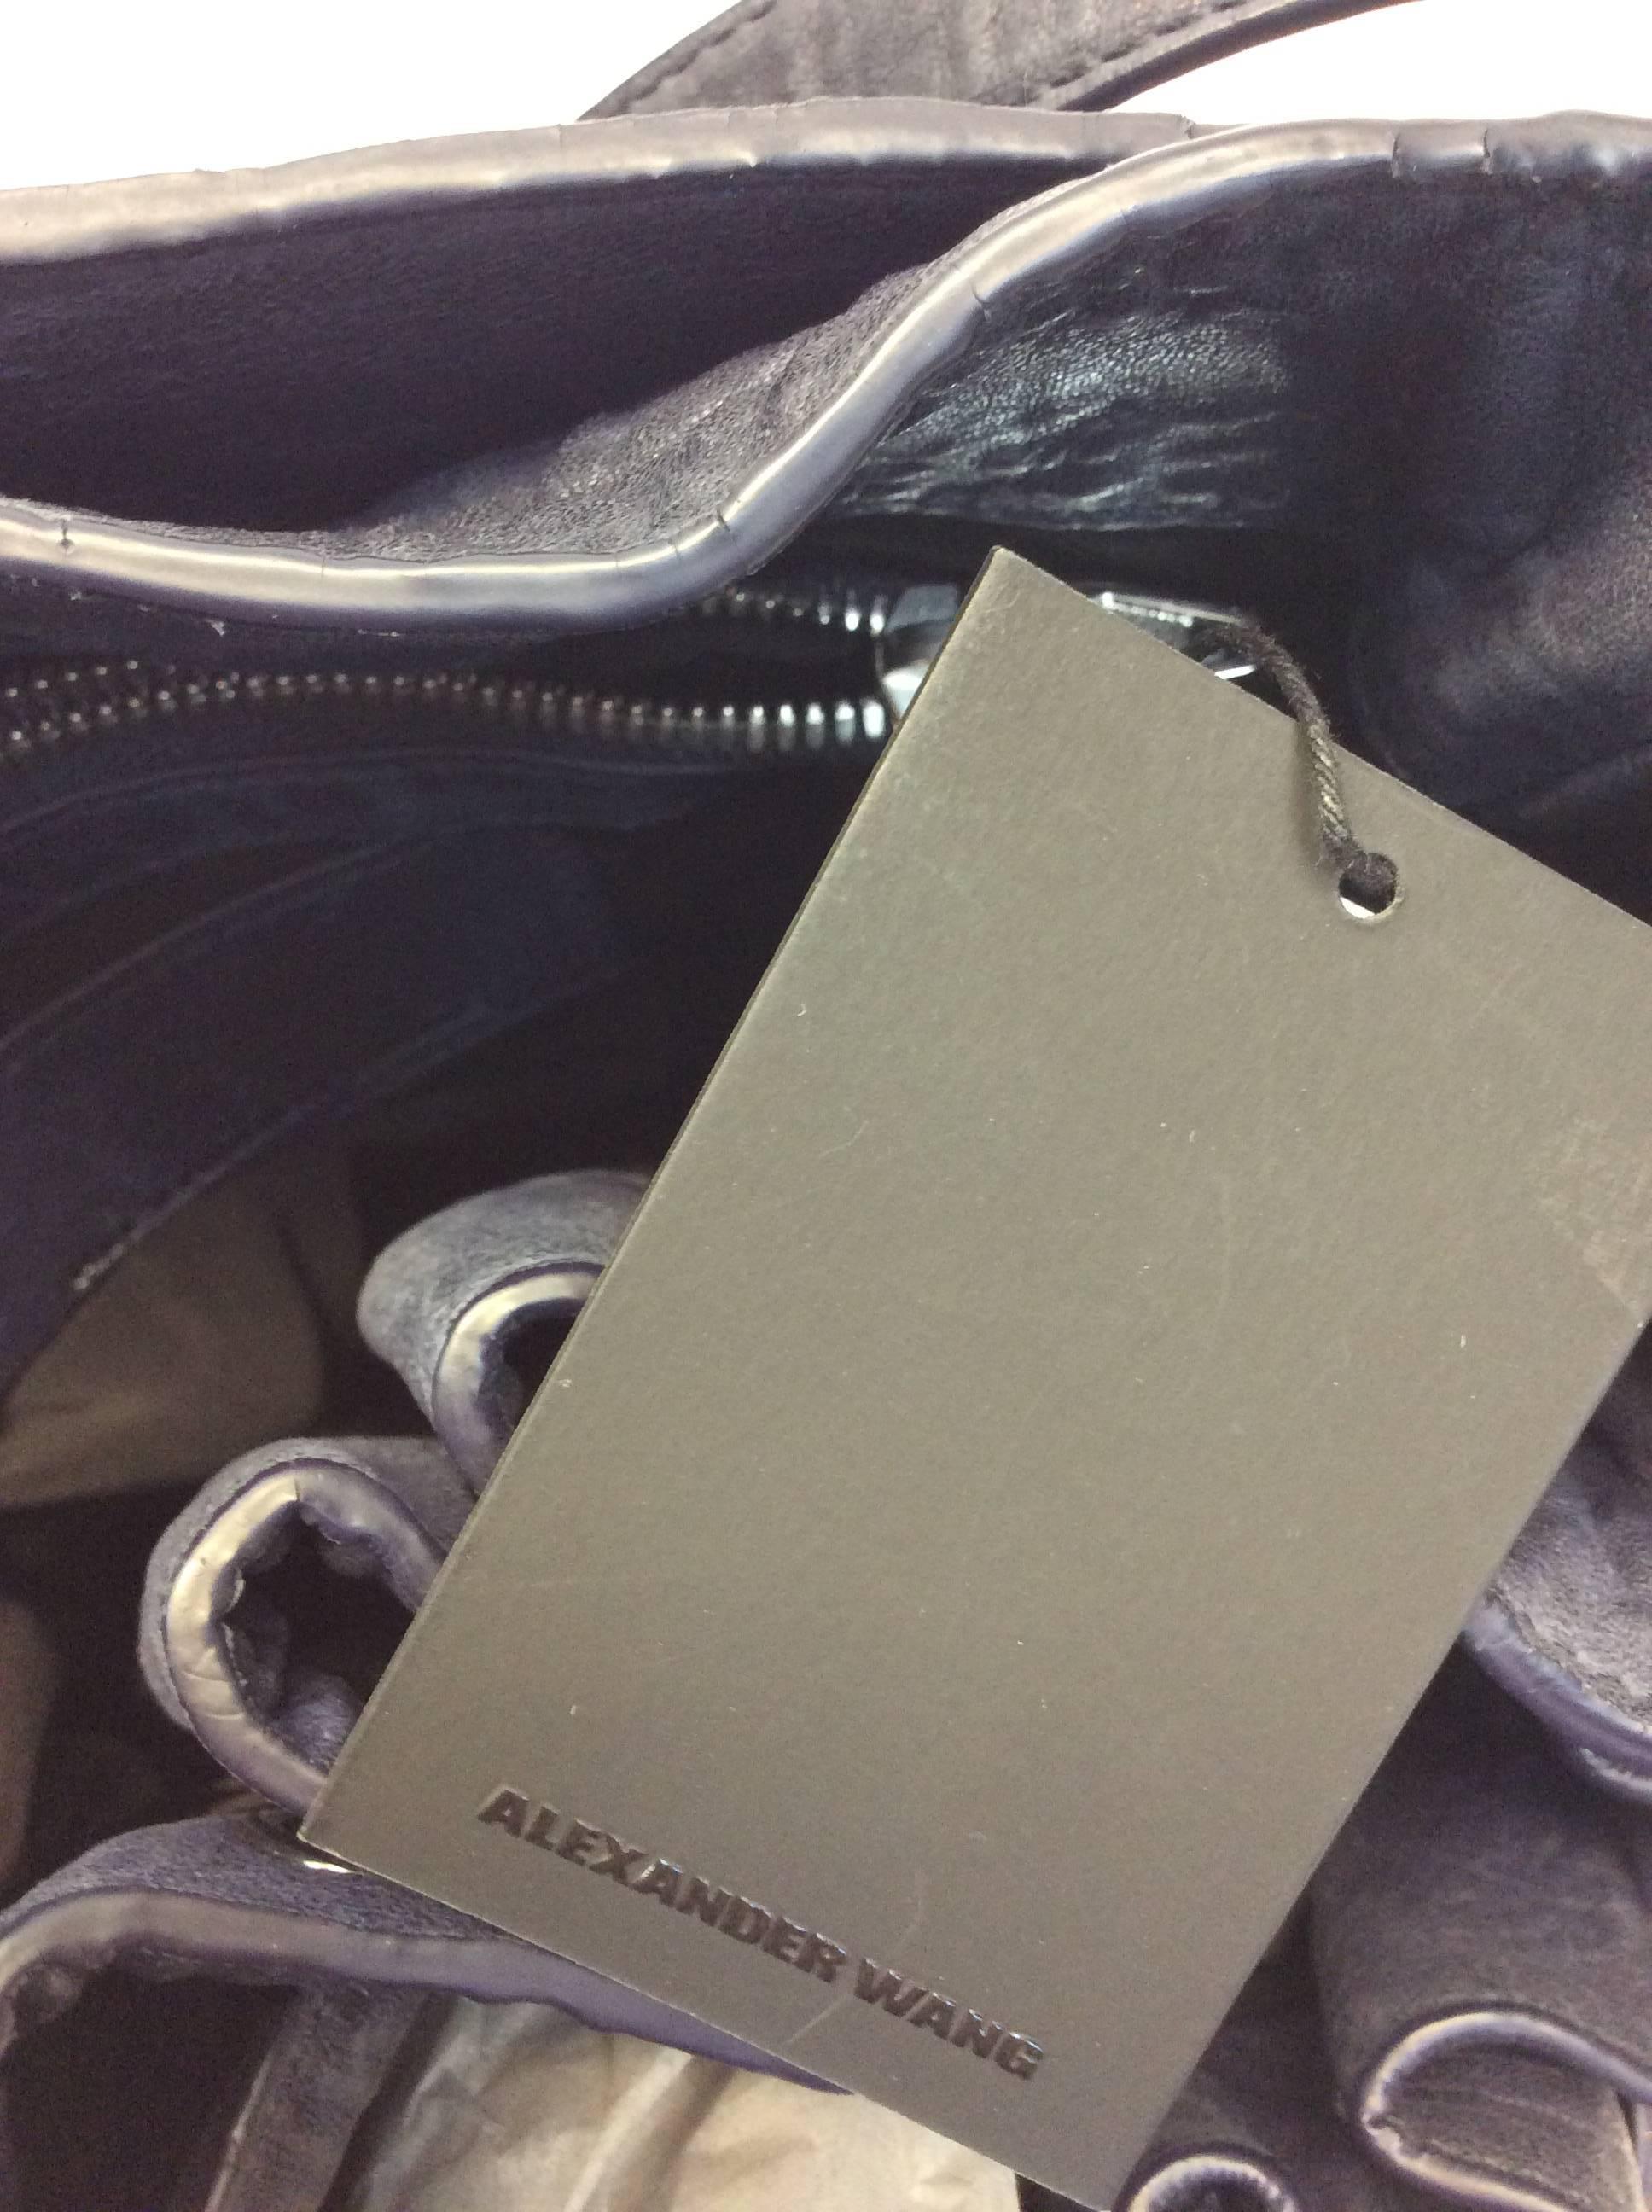 Alexander Wang Navy Studded Leather Bucket Bag In Excellent Condition For Sale In Narberth, PA